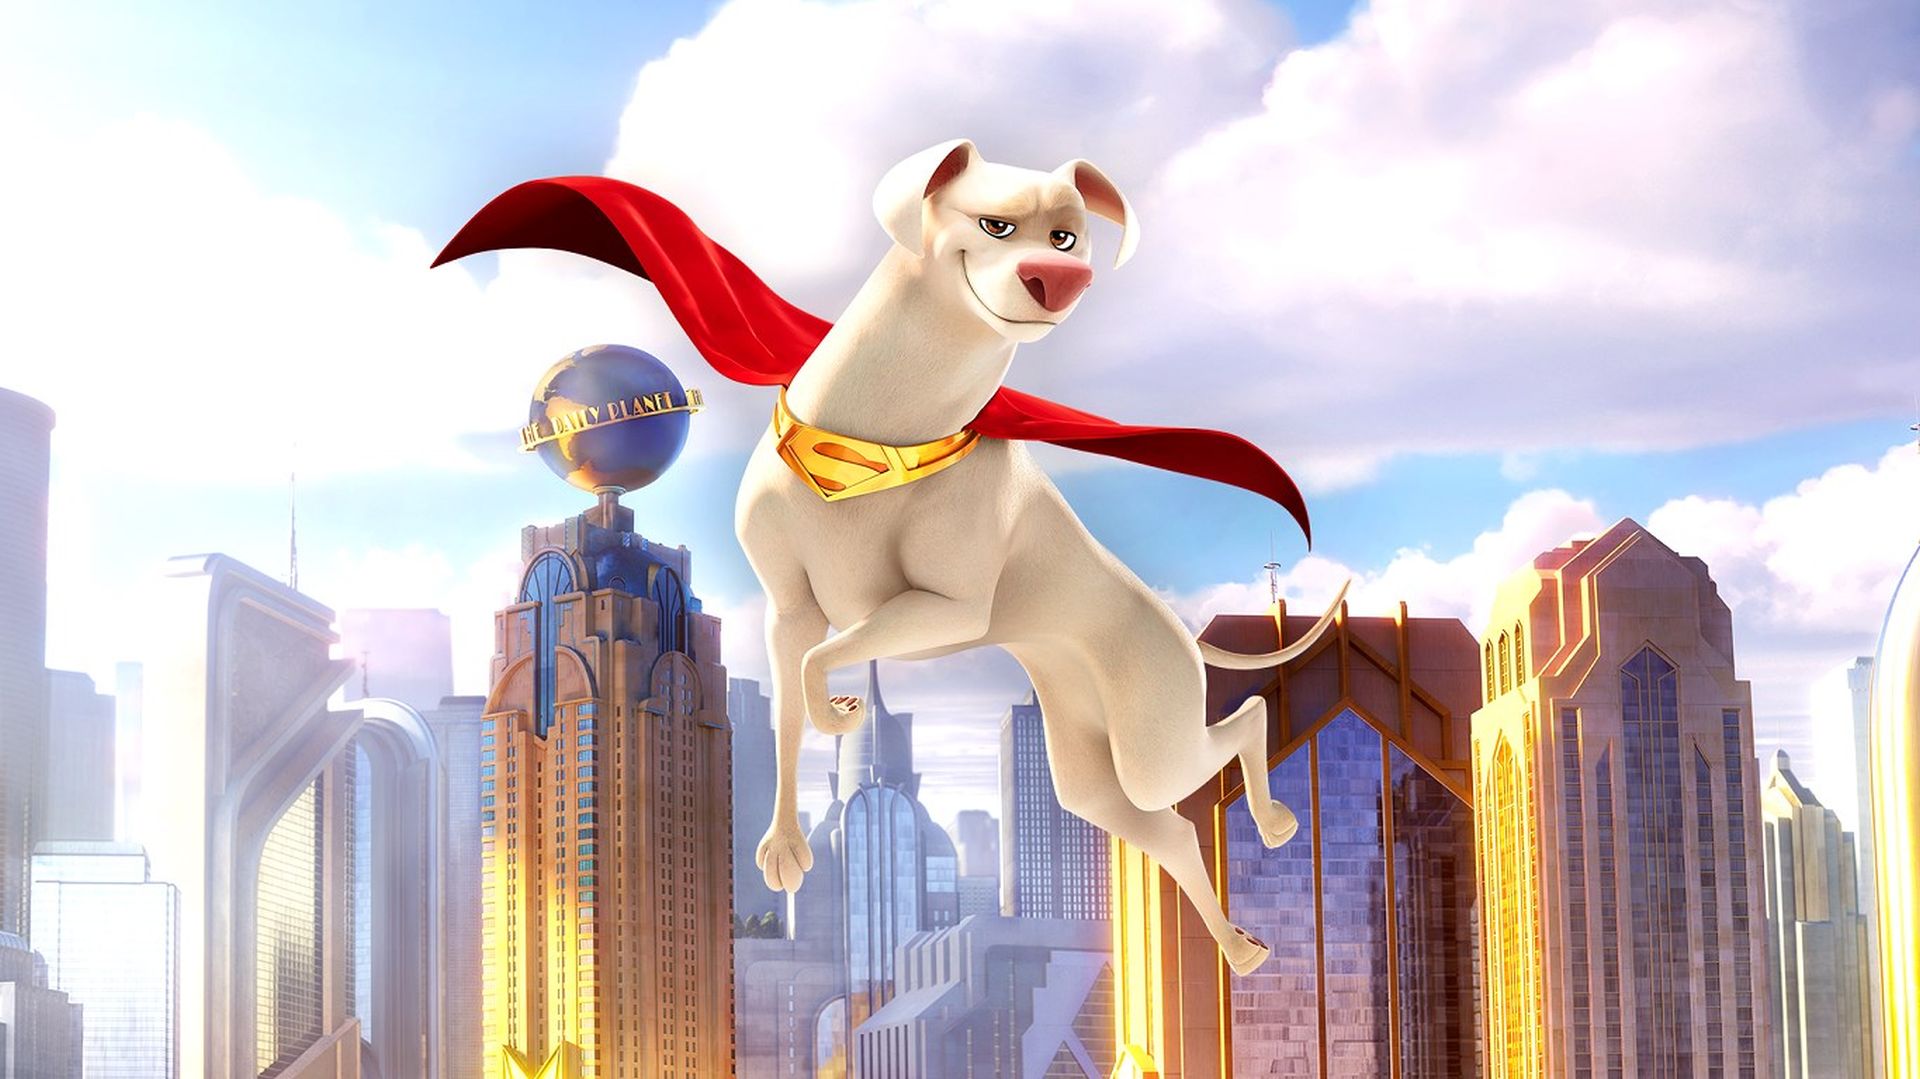 DC League of Super-Pets: The Adventures of Krypto and Ace – July 14